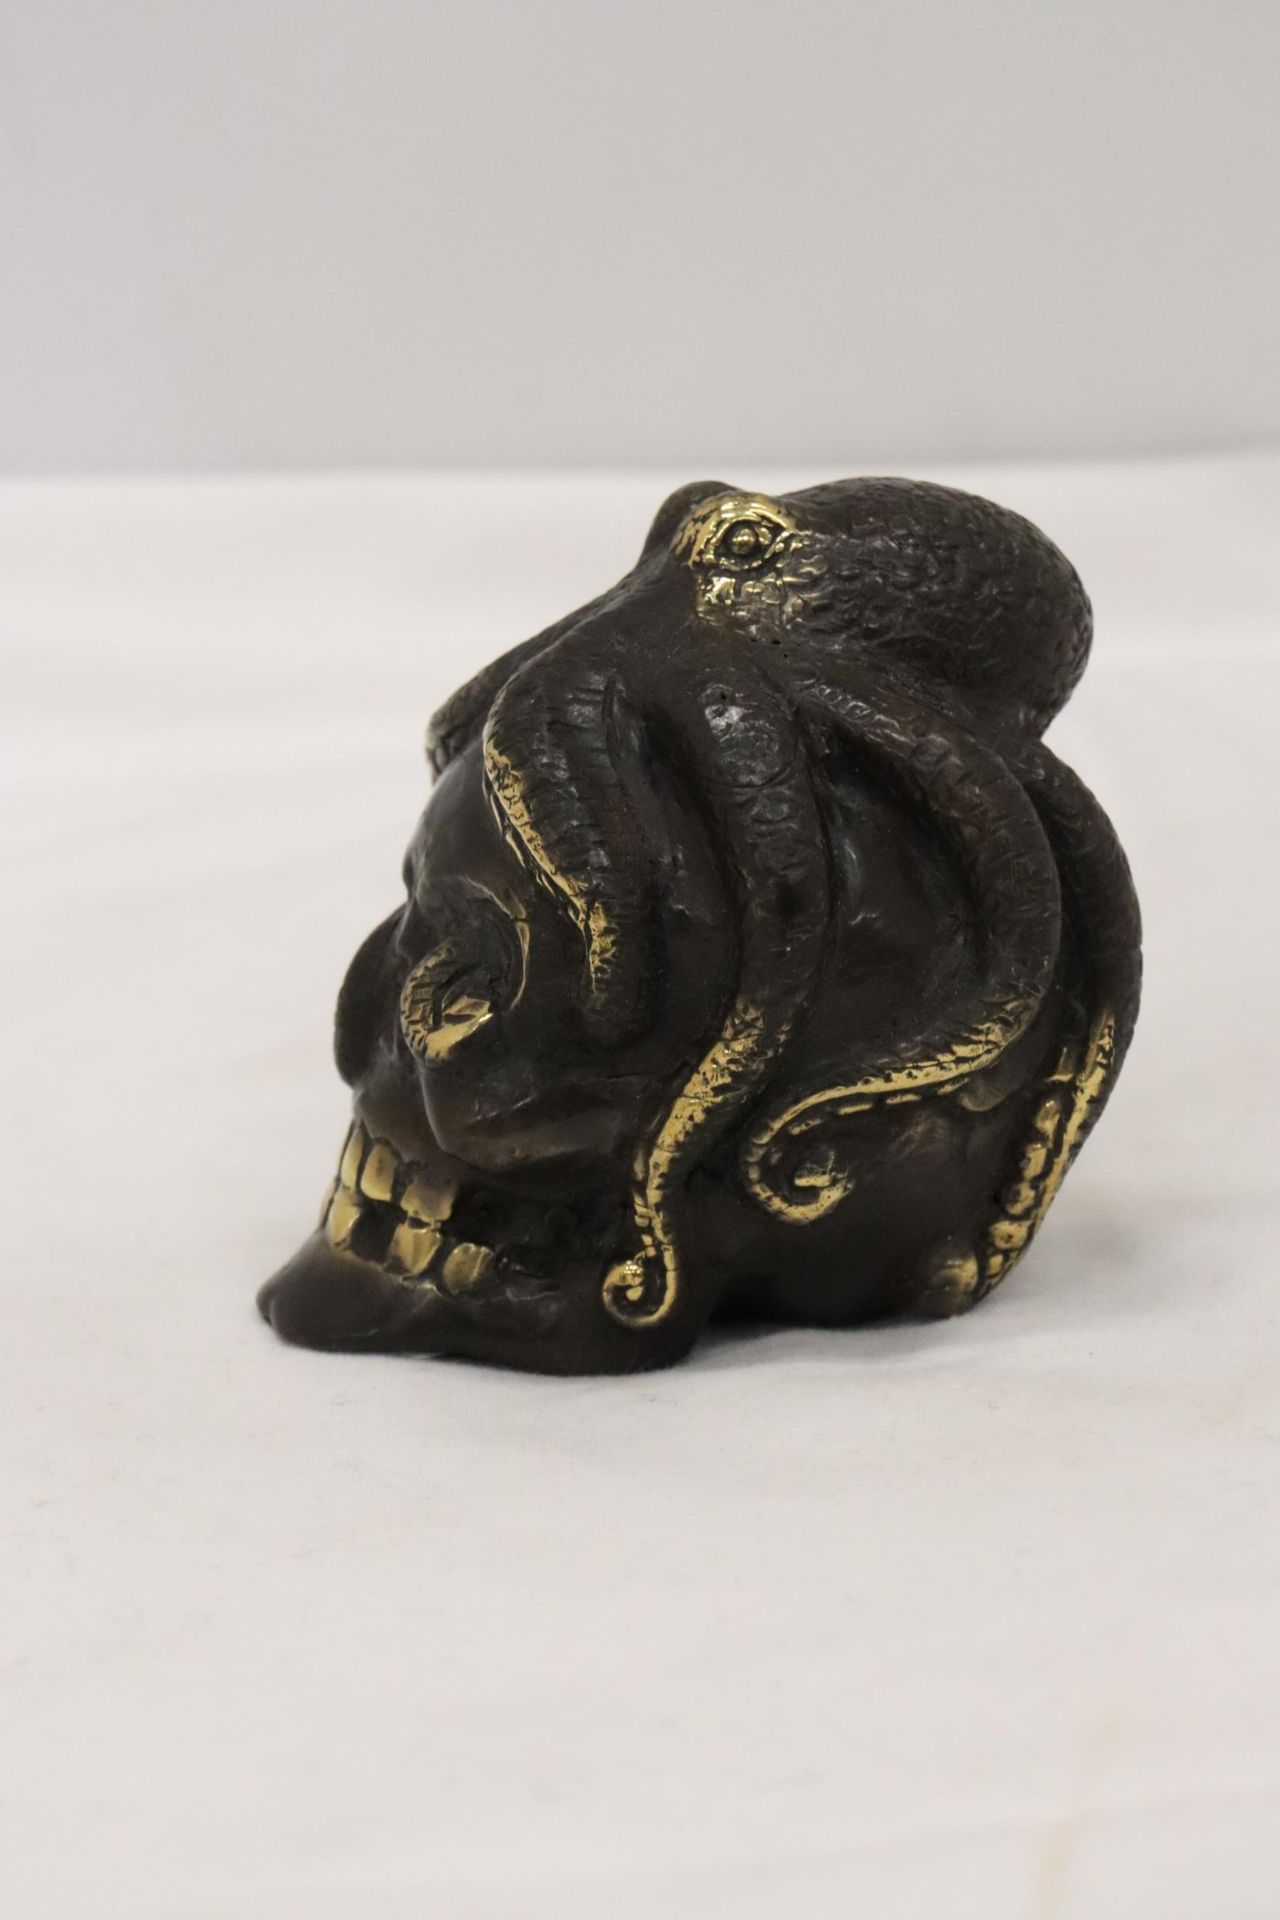 A BRONZE OCTUPUS AND SKULL - Image 4 of 5